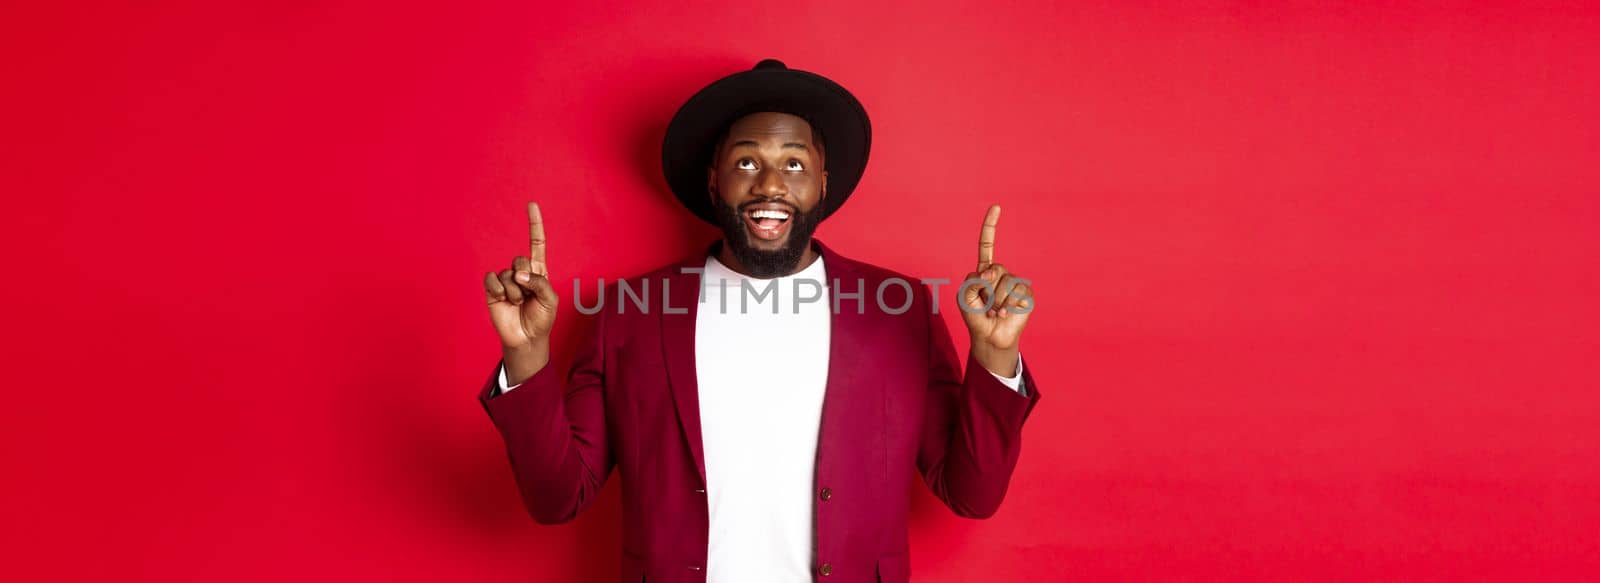 Winter holidays and shopping concept. Cheerful Black man looking and pointing fingers up, checking out xmas promo, standing over red background.